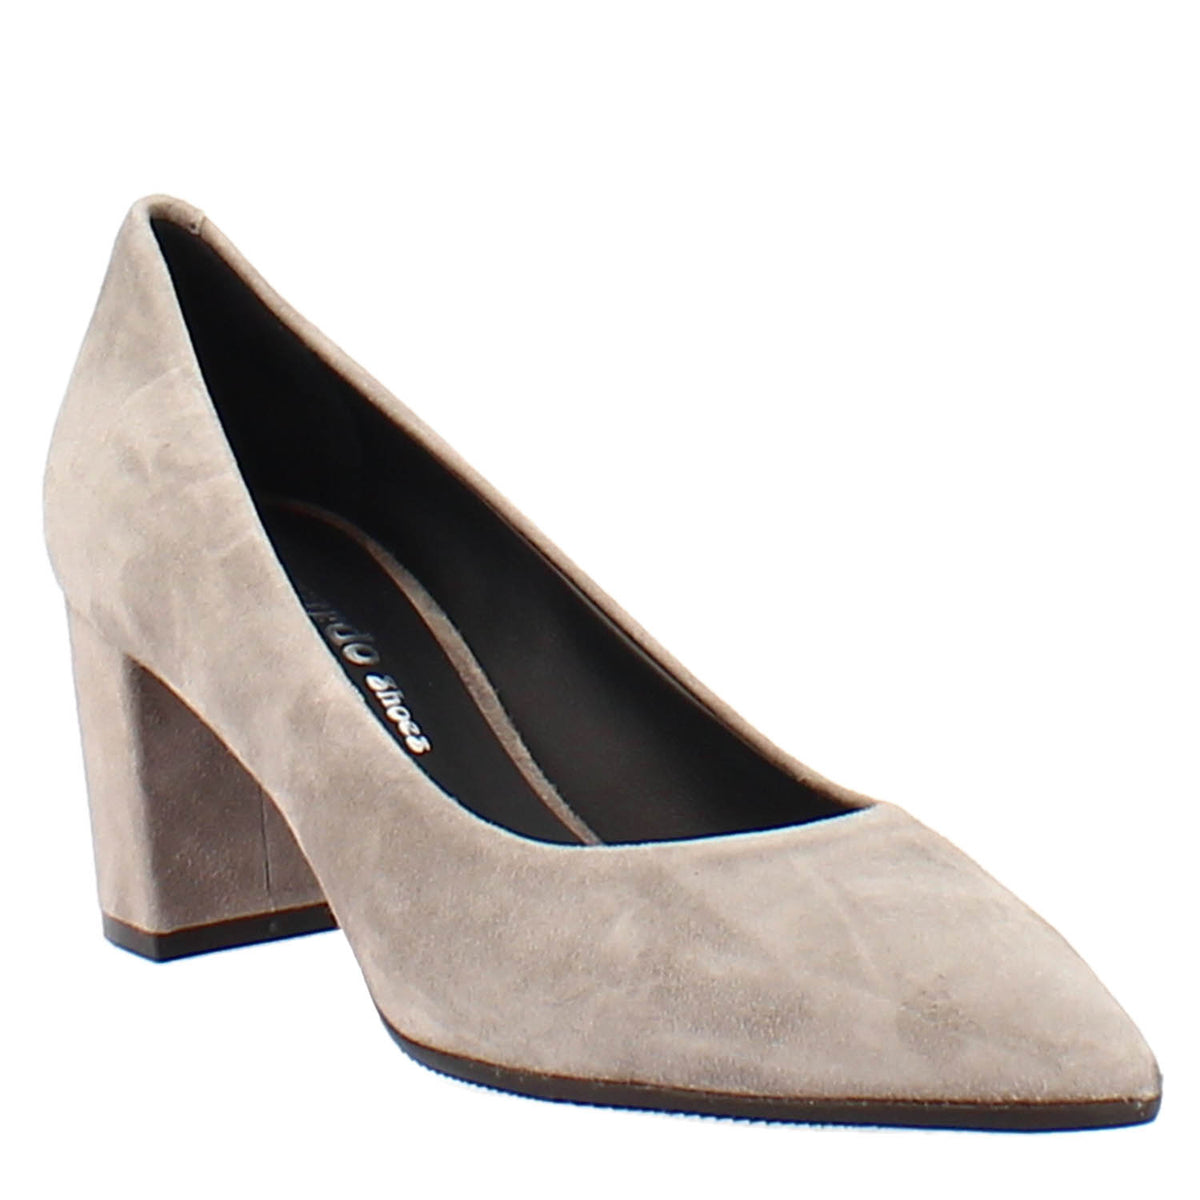 Décolleté in dove gray suede with high heel